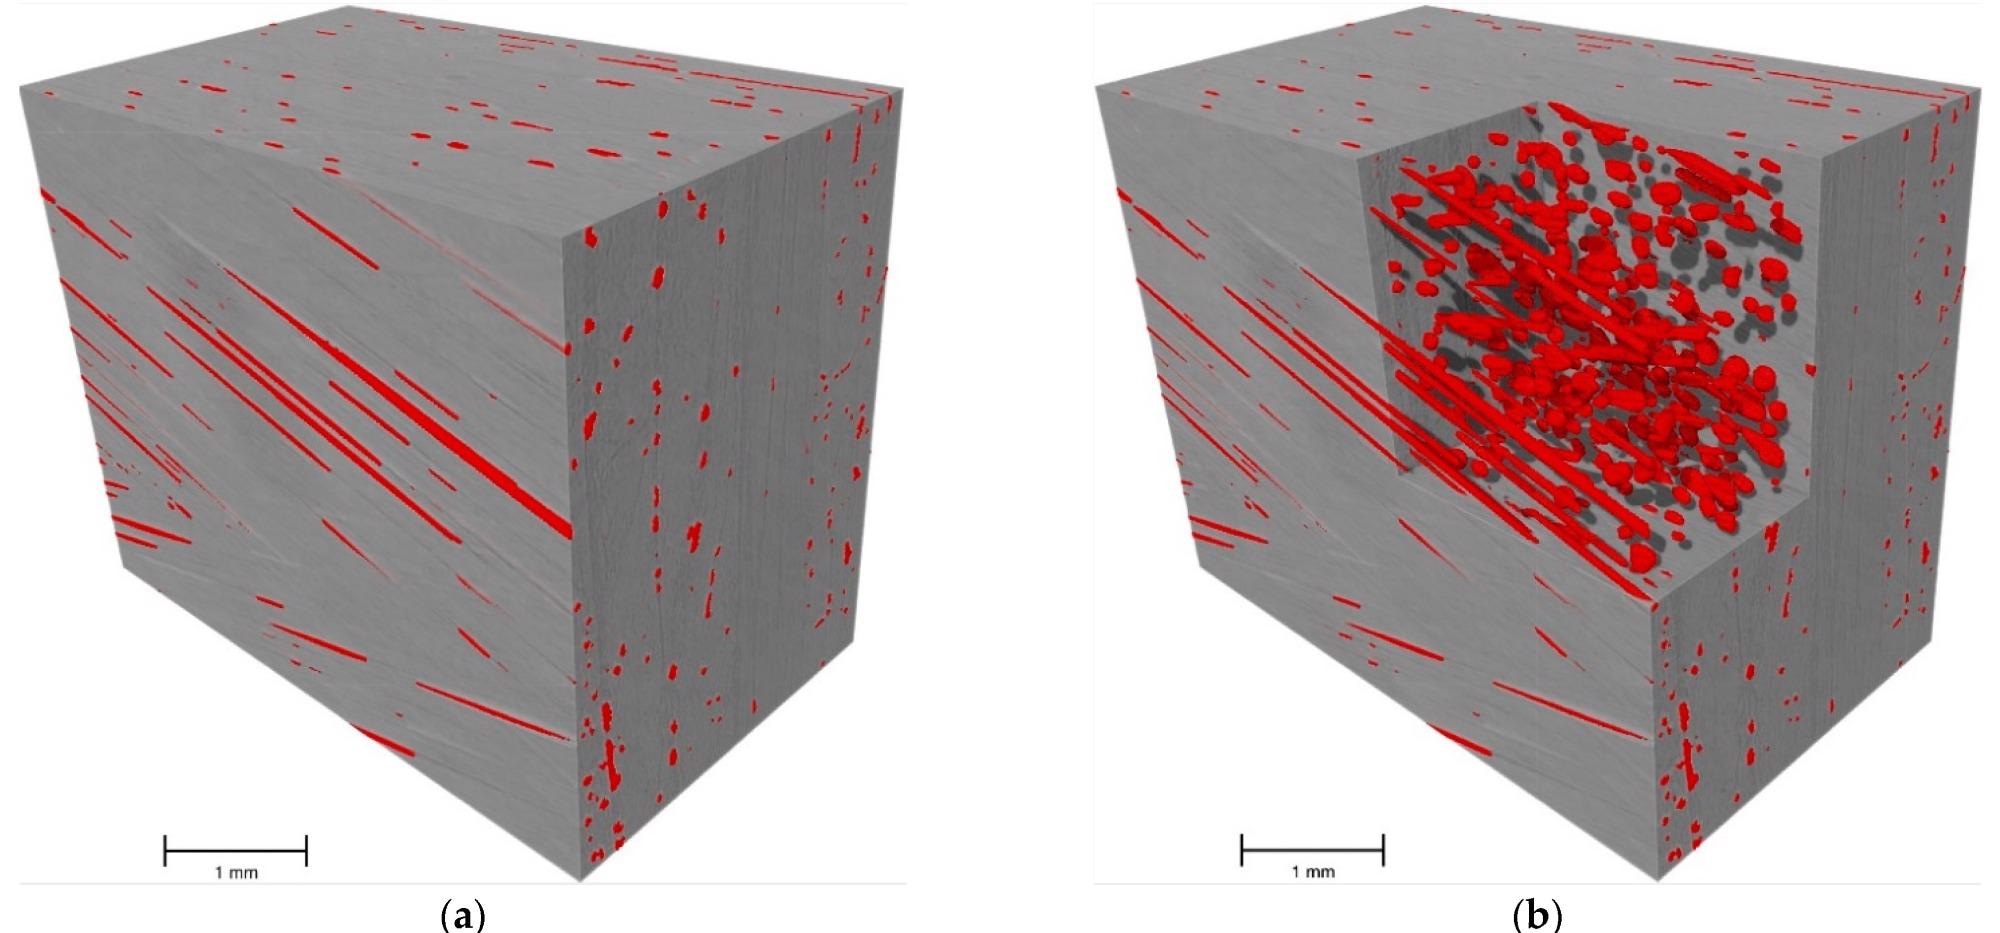 “µCT 2” scanned sample showing the composite in gray and the voids in red;  (a) the scanned sample, (b) a cross section showing the voids in the sample.